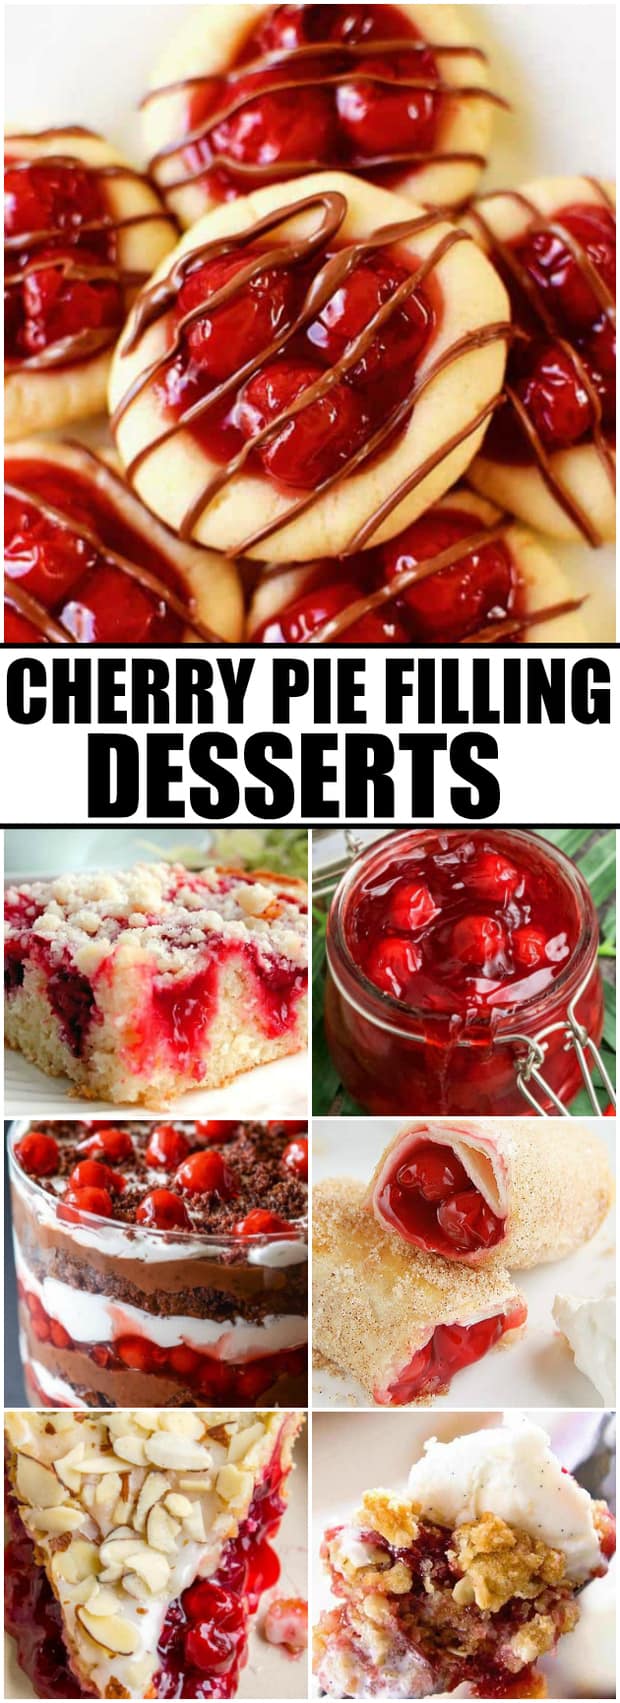 Old Fashioned Cherry Pie Filling Desserts